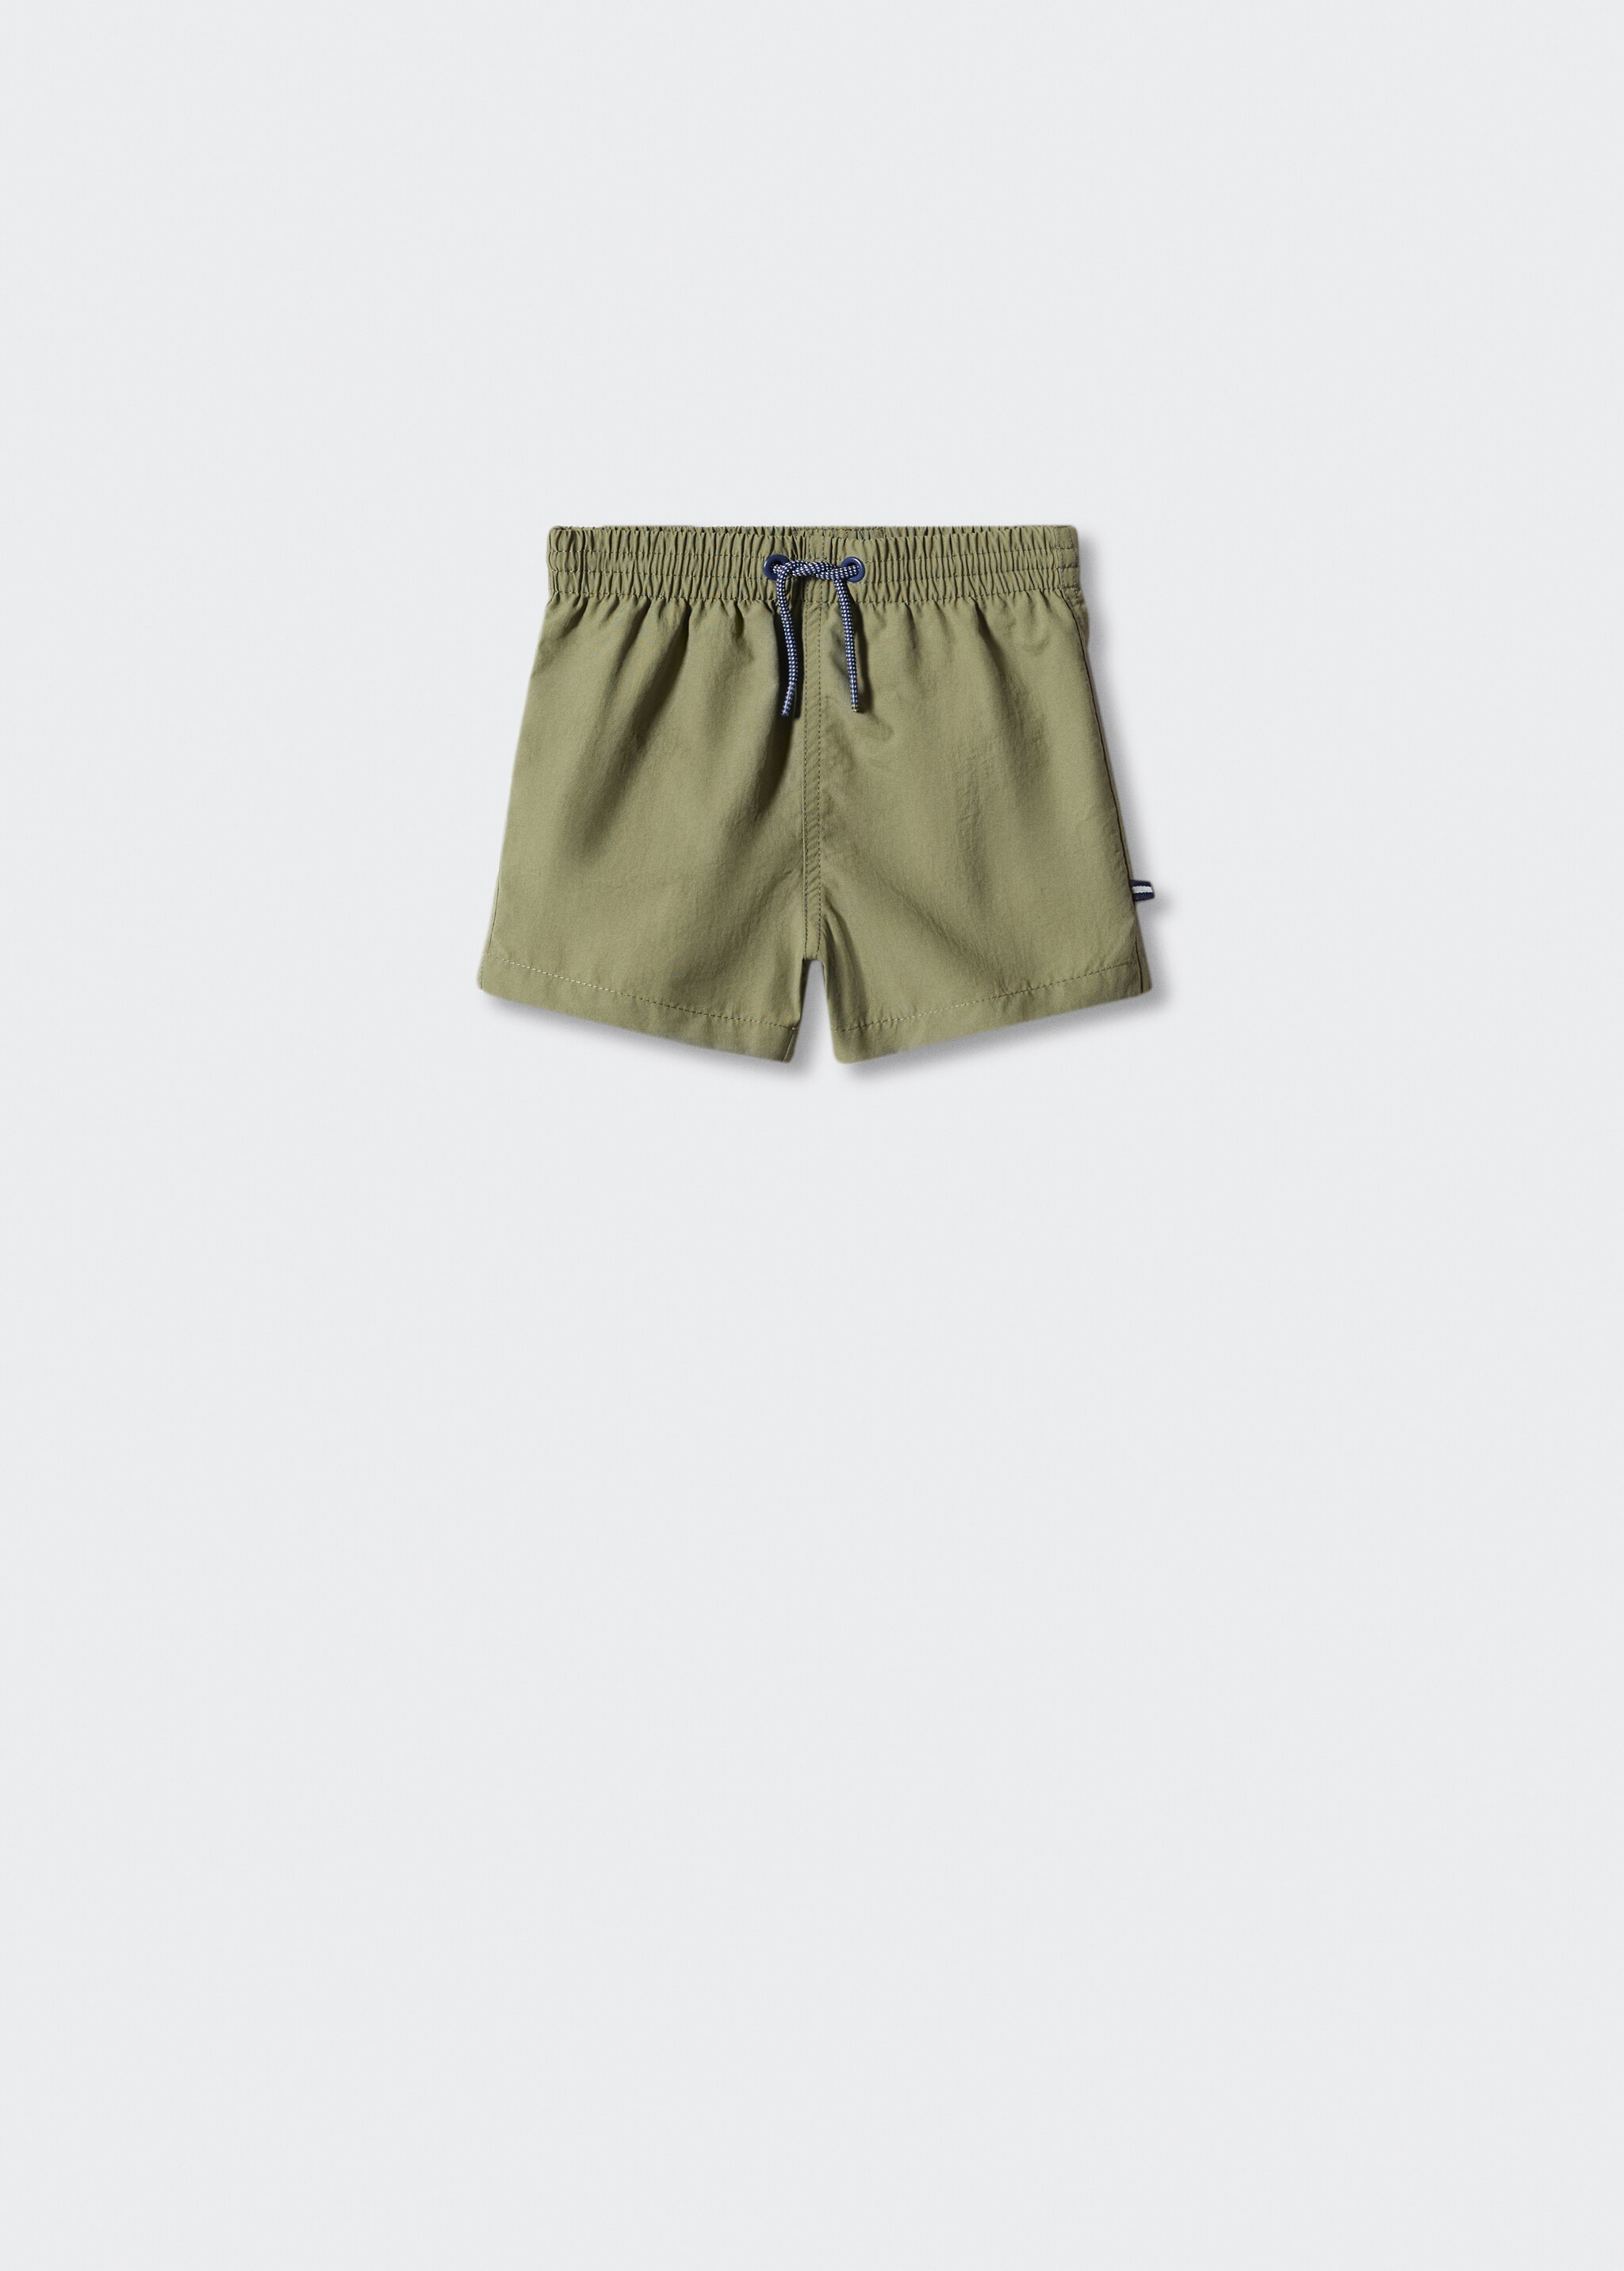 Cord plain swimming trunks - Article without model